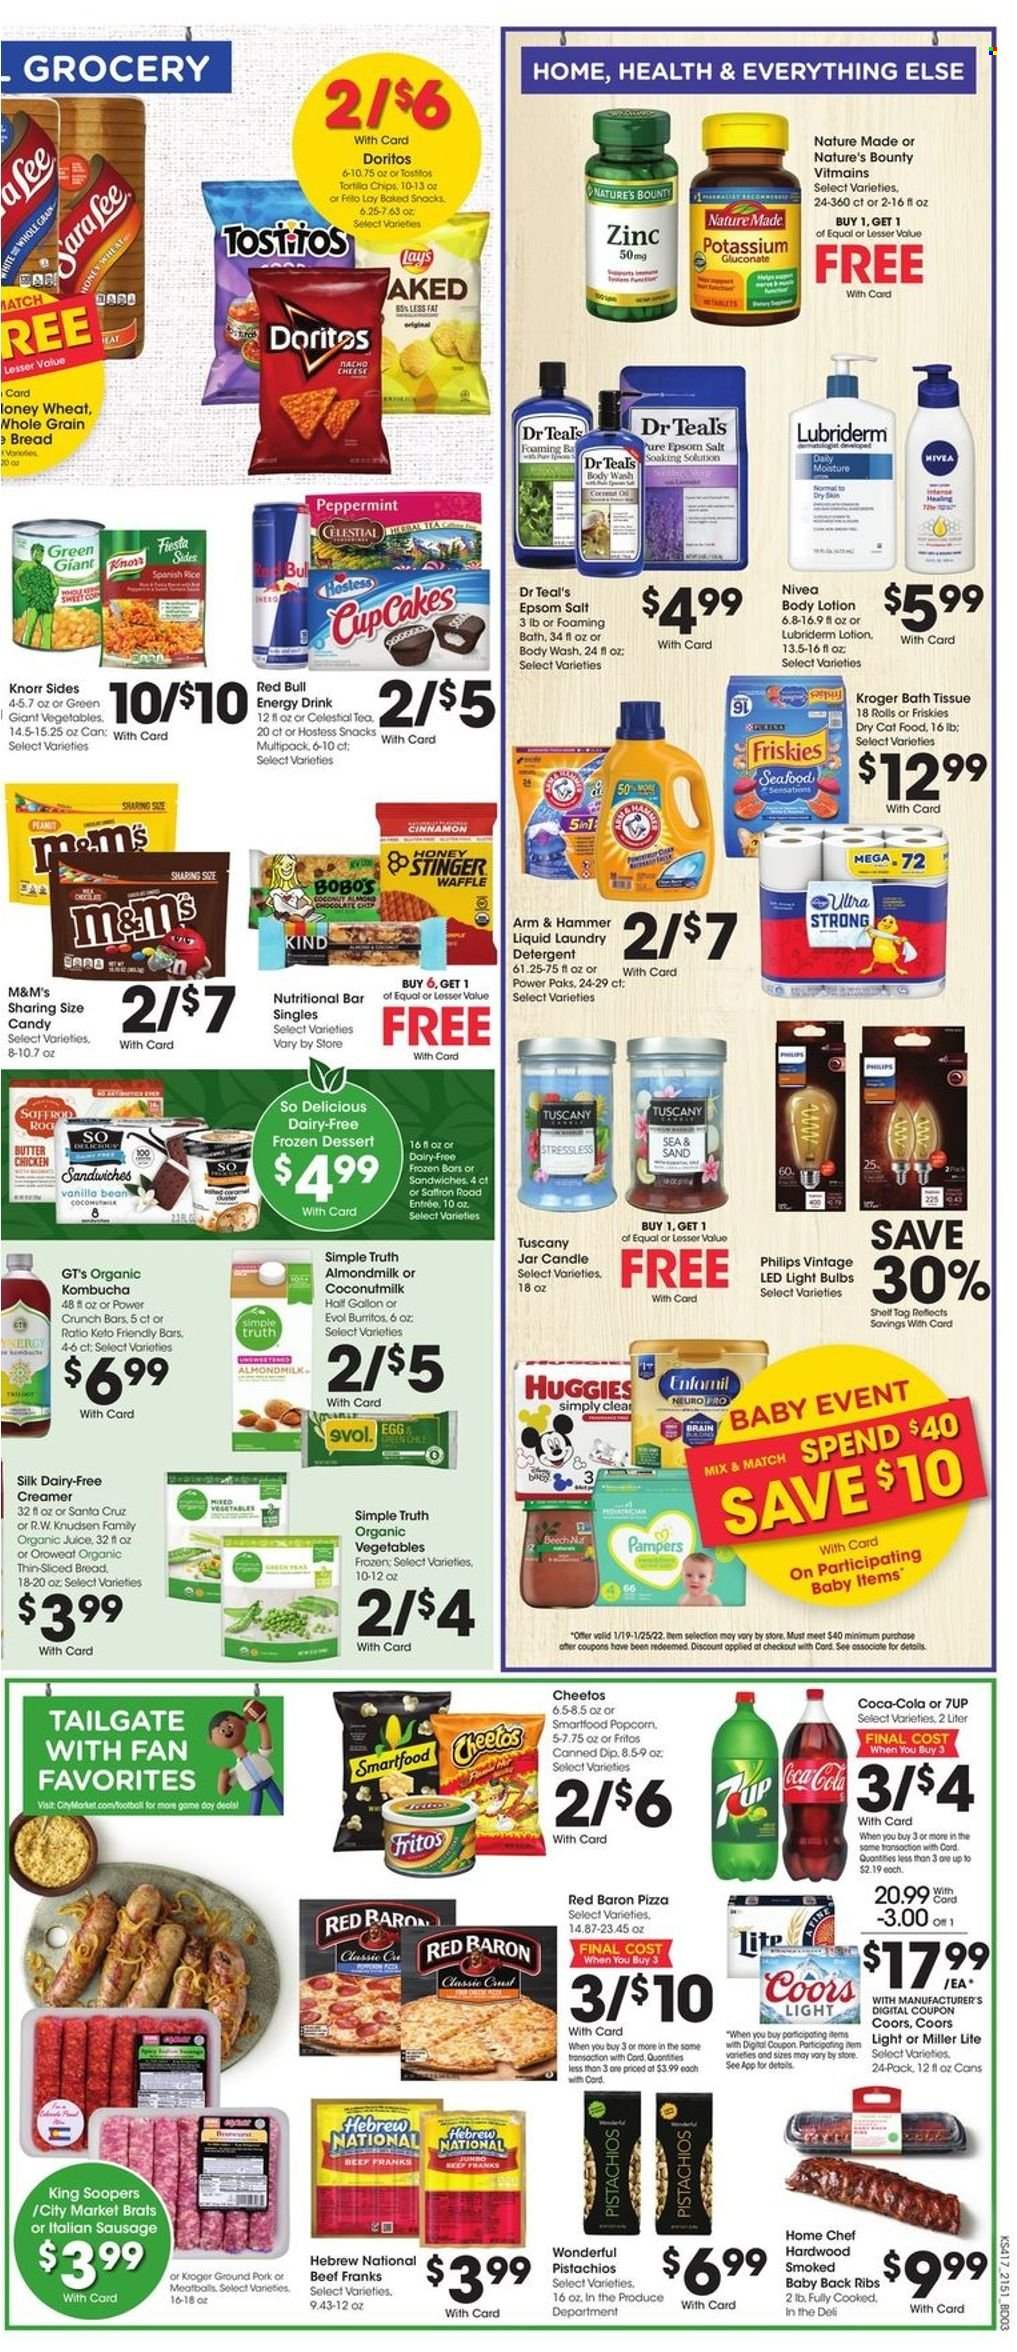 thumbnail - City Market Flyer - 01/19/2022 - 01/25/2022 - Sales products - bread, cupcake, coconut, pizza, sandwich, Knorr, burrito, sausage, italian sausage, almond milk, Silk, eggs, creamer, dip, Red Baron, snack, M&M's, Doritos, Fritos, Cheetos, Lay’s, Smartfood, popcorn, ARM & HAMMER, coconut milk, rice, cinnamon, honey, pistachios, Coca-Cola, juice, energy drink, 7UP, Red Bull, kombucha, tea, beer, ground pork, pork meat, pork ribs, pork back ribs, Huggies, Pampers, Nivea, bath tissue, detergent, laundry detergent, body wash, body lotion, Lubriderm, candle, bulb, light bulb, Philips, animal food, cat food, dry cat food, Friskies, LED light, Nature Made, Nature's Bounty, zinc, Miller Lite, Coors. Page 6.